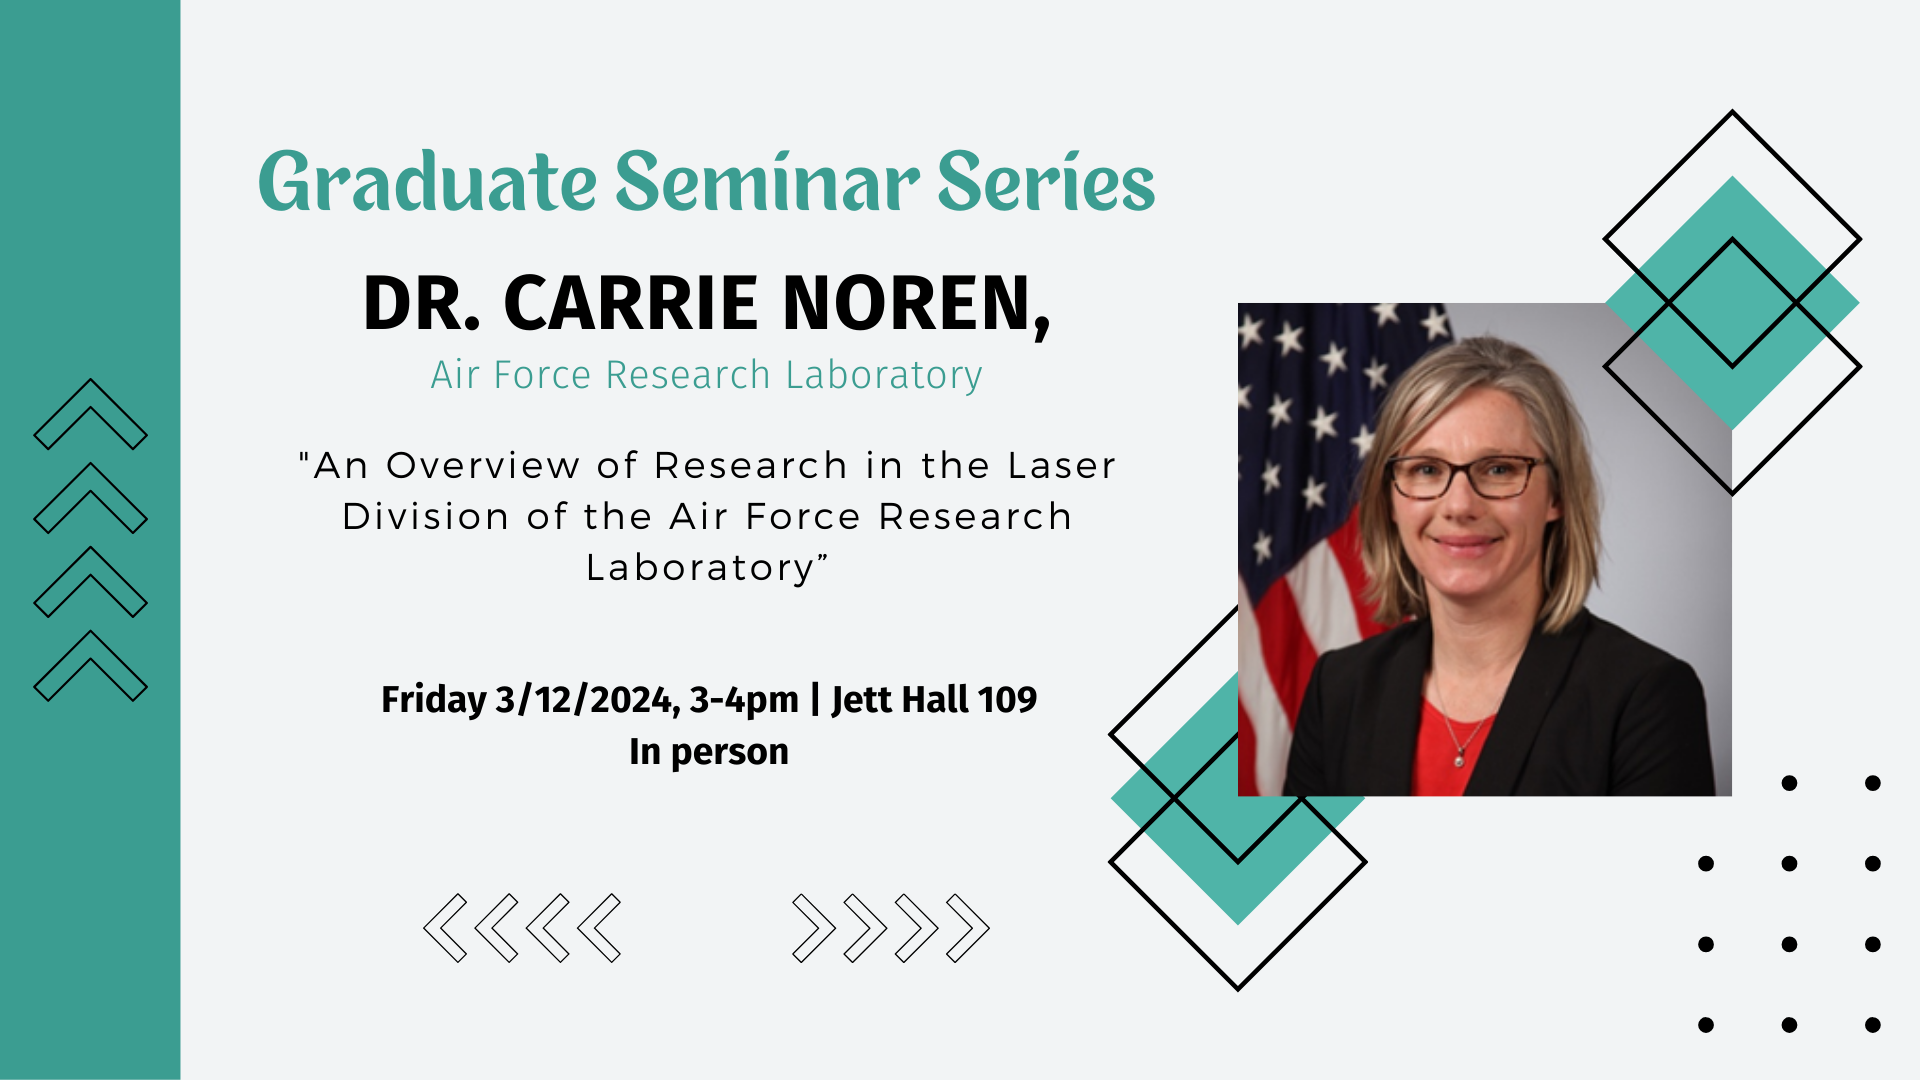 decorative image announcement of Dr. Carrie Noren